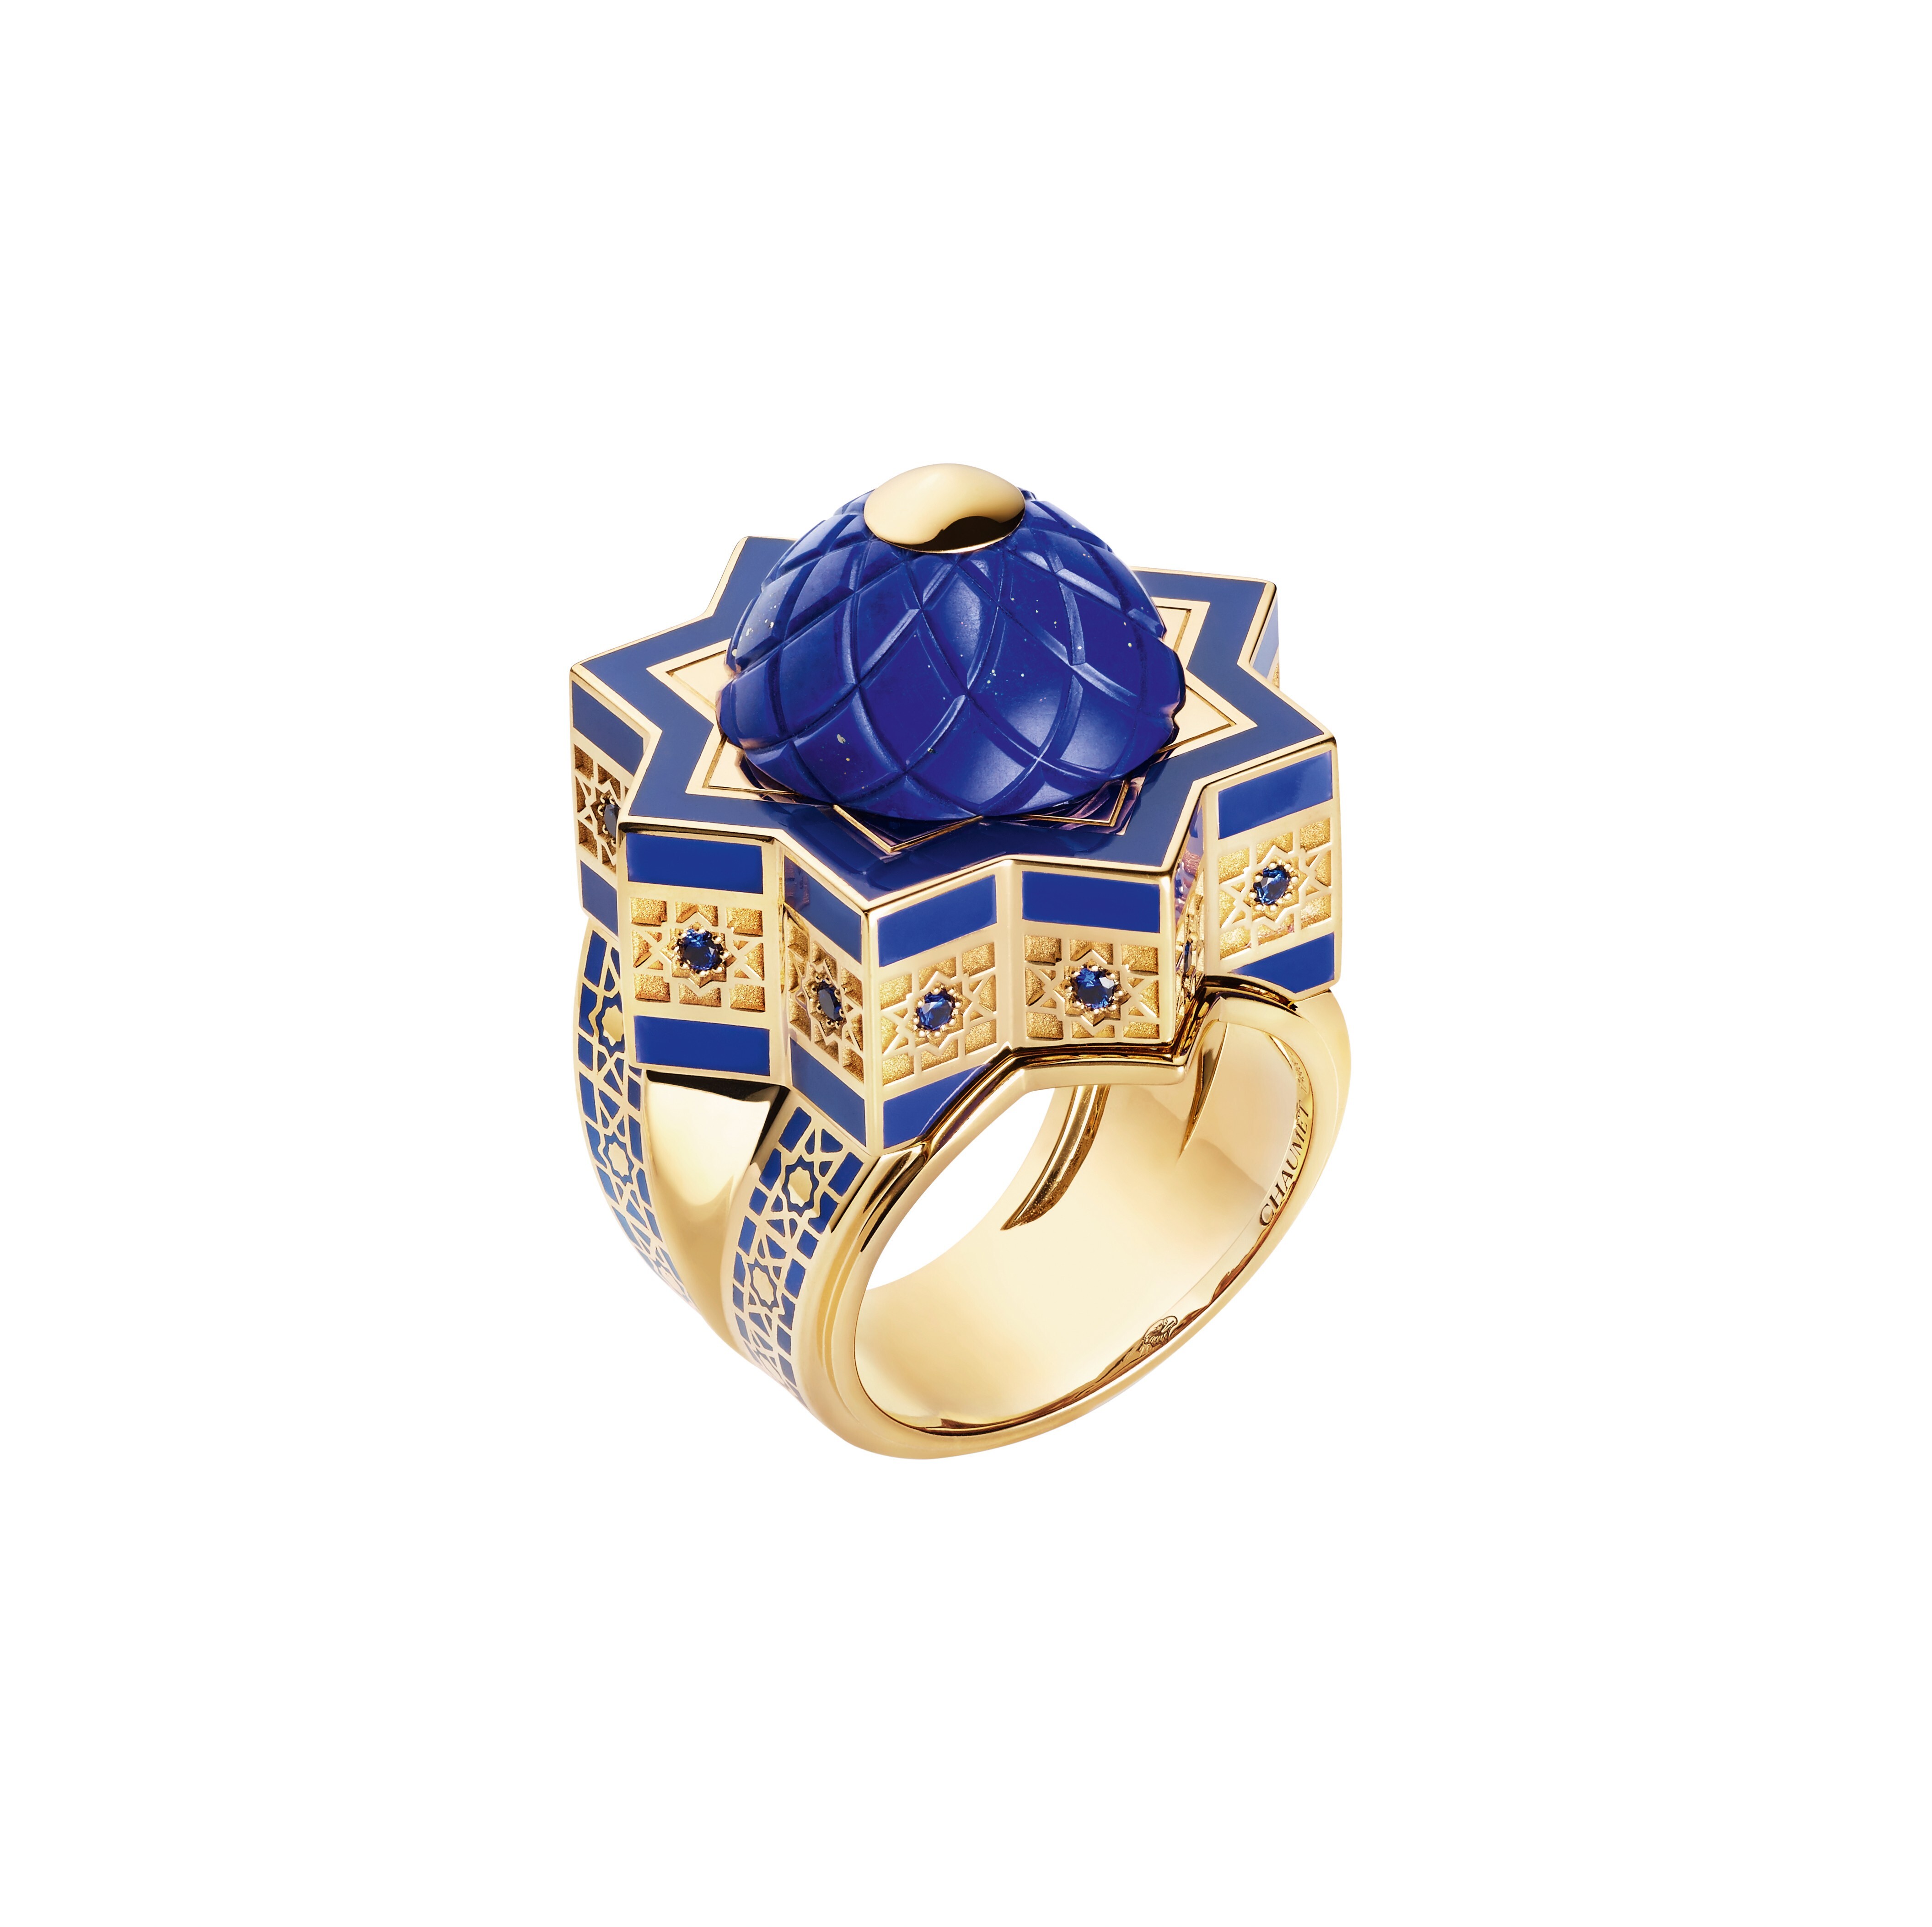 Trésors d'Ailleurs Shéhérazade ring in yellow gold and lacquer, set with round sapphires and one sculpted cabochon-cut lapis lazuli, by Chaumet is inspired by Islamic architecture. Photo: Chaumet